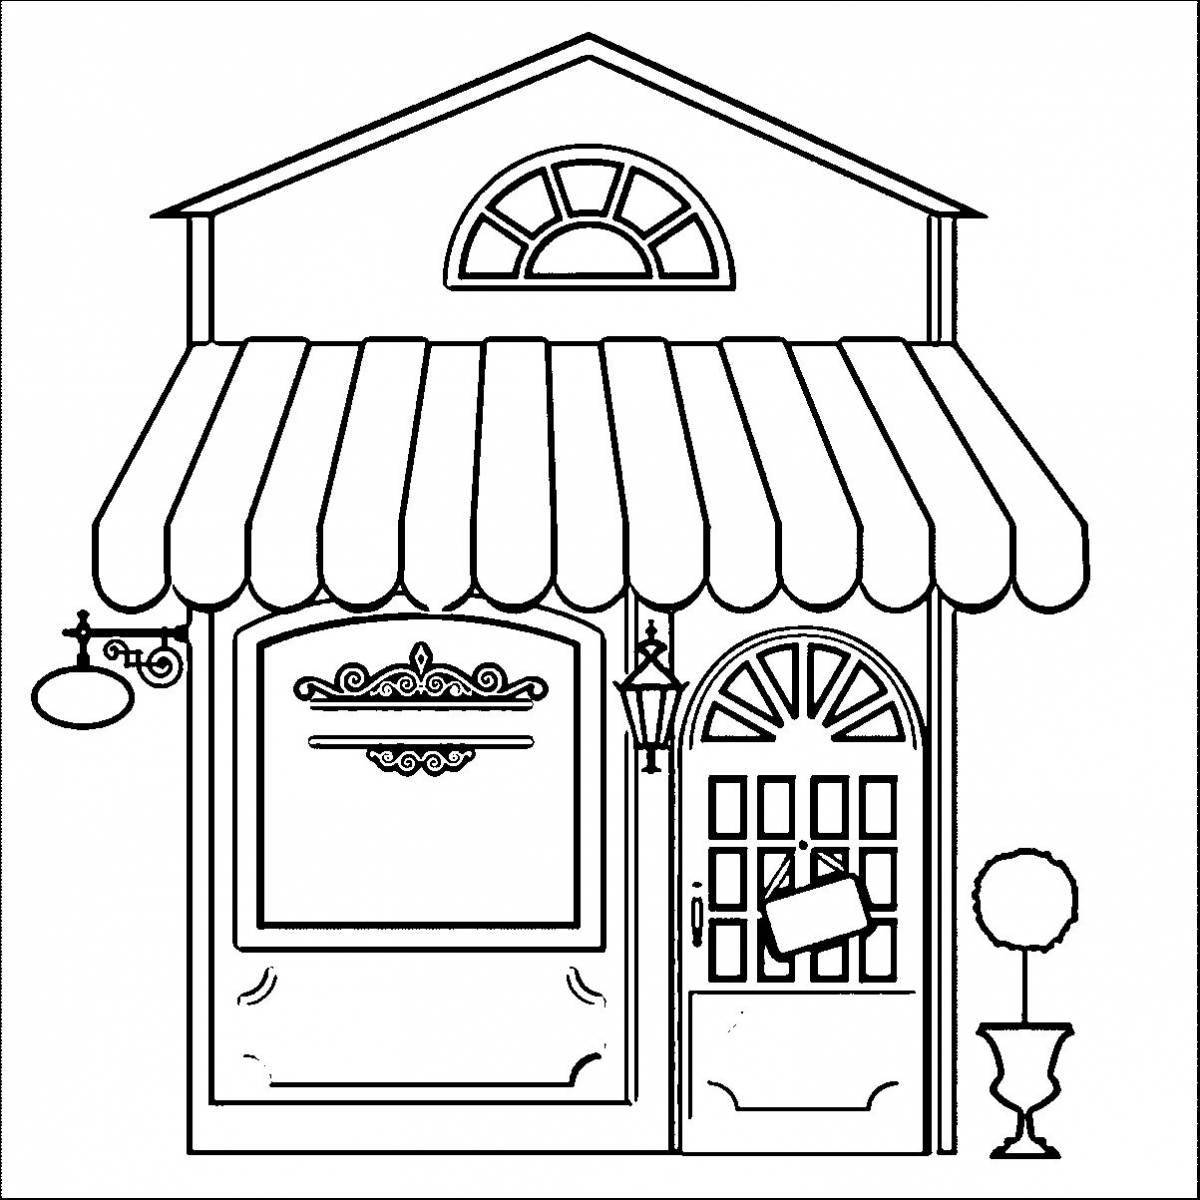 Coloring page holiday showcase